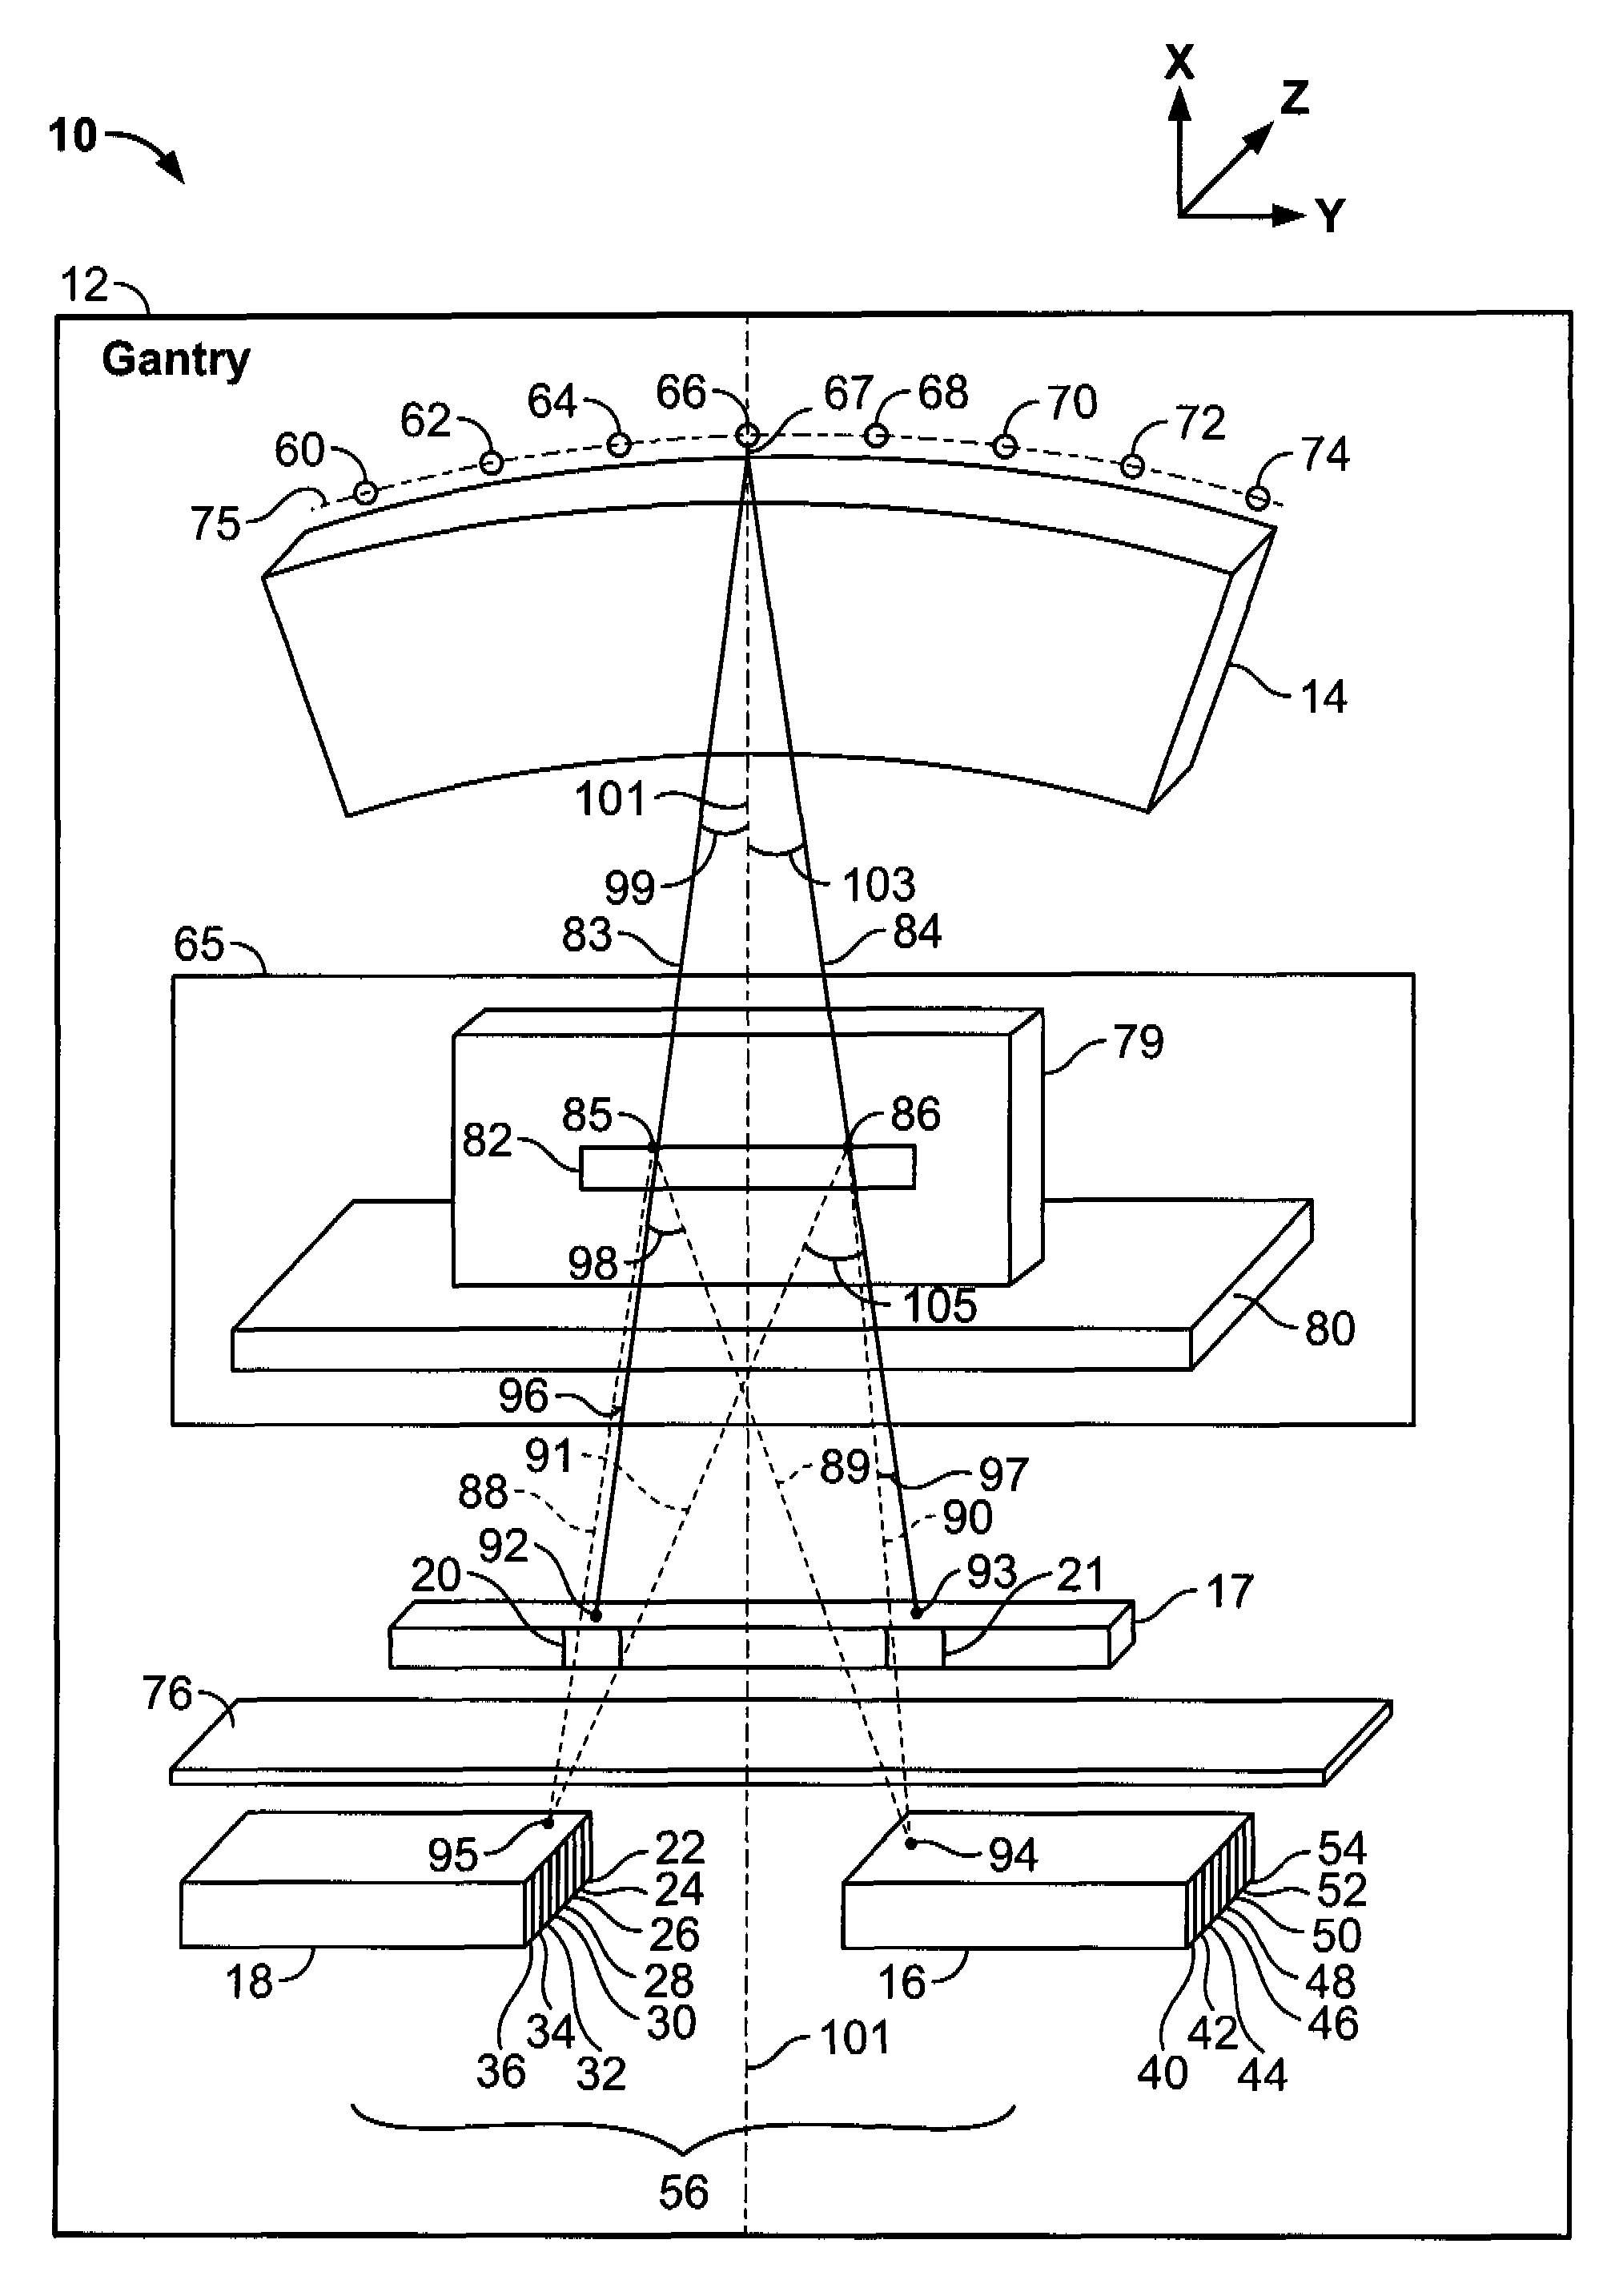 Systems and methods for identifying a substance